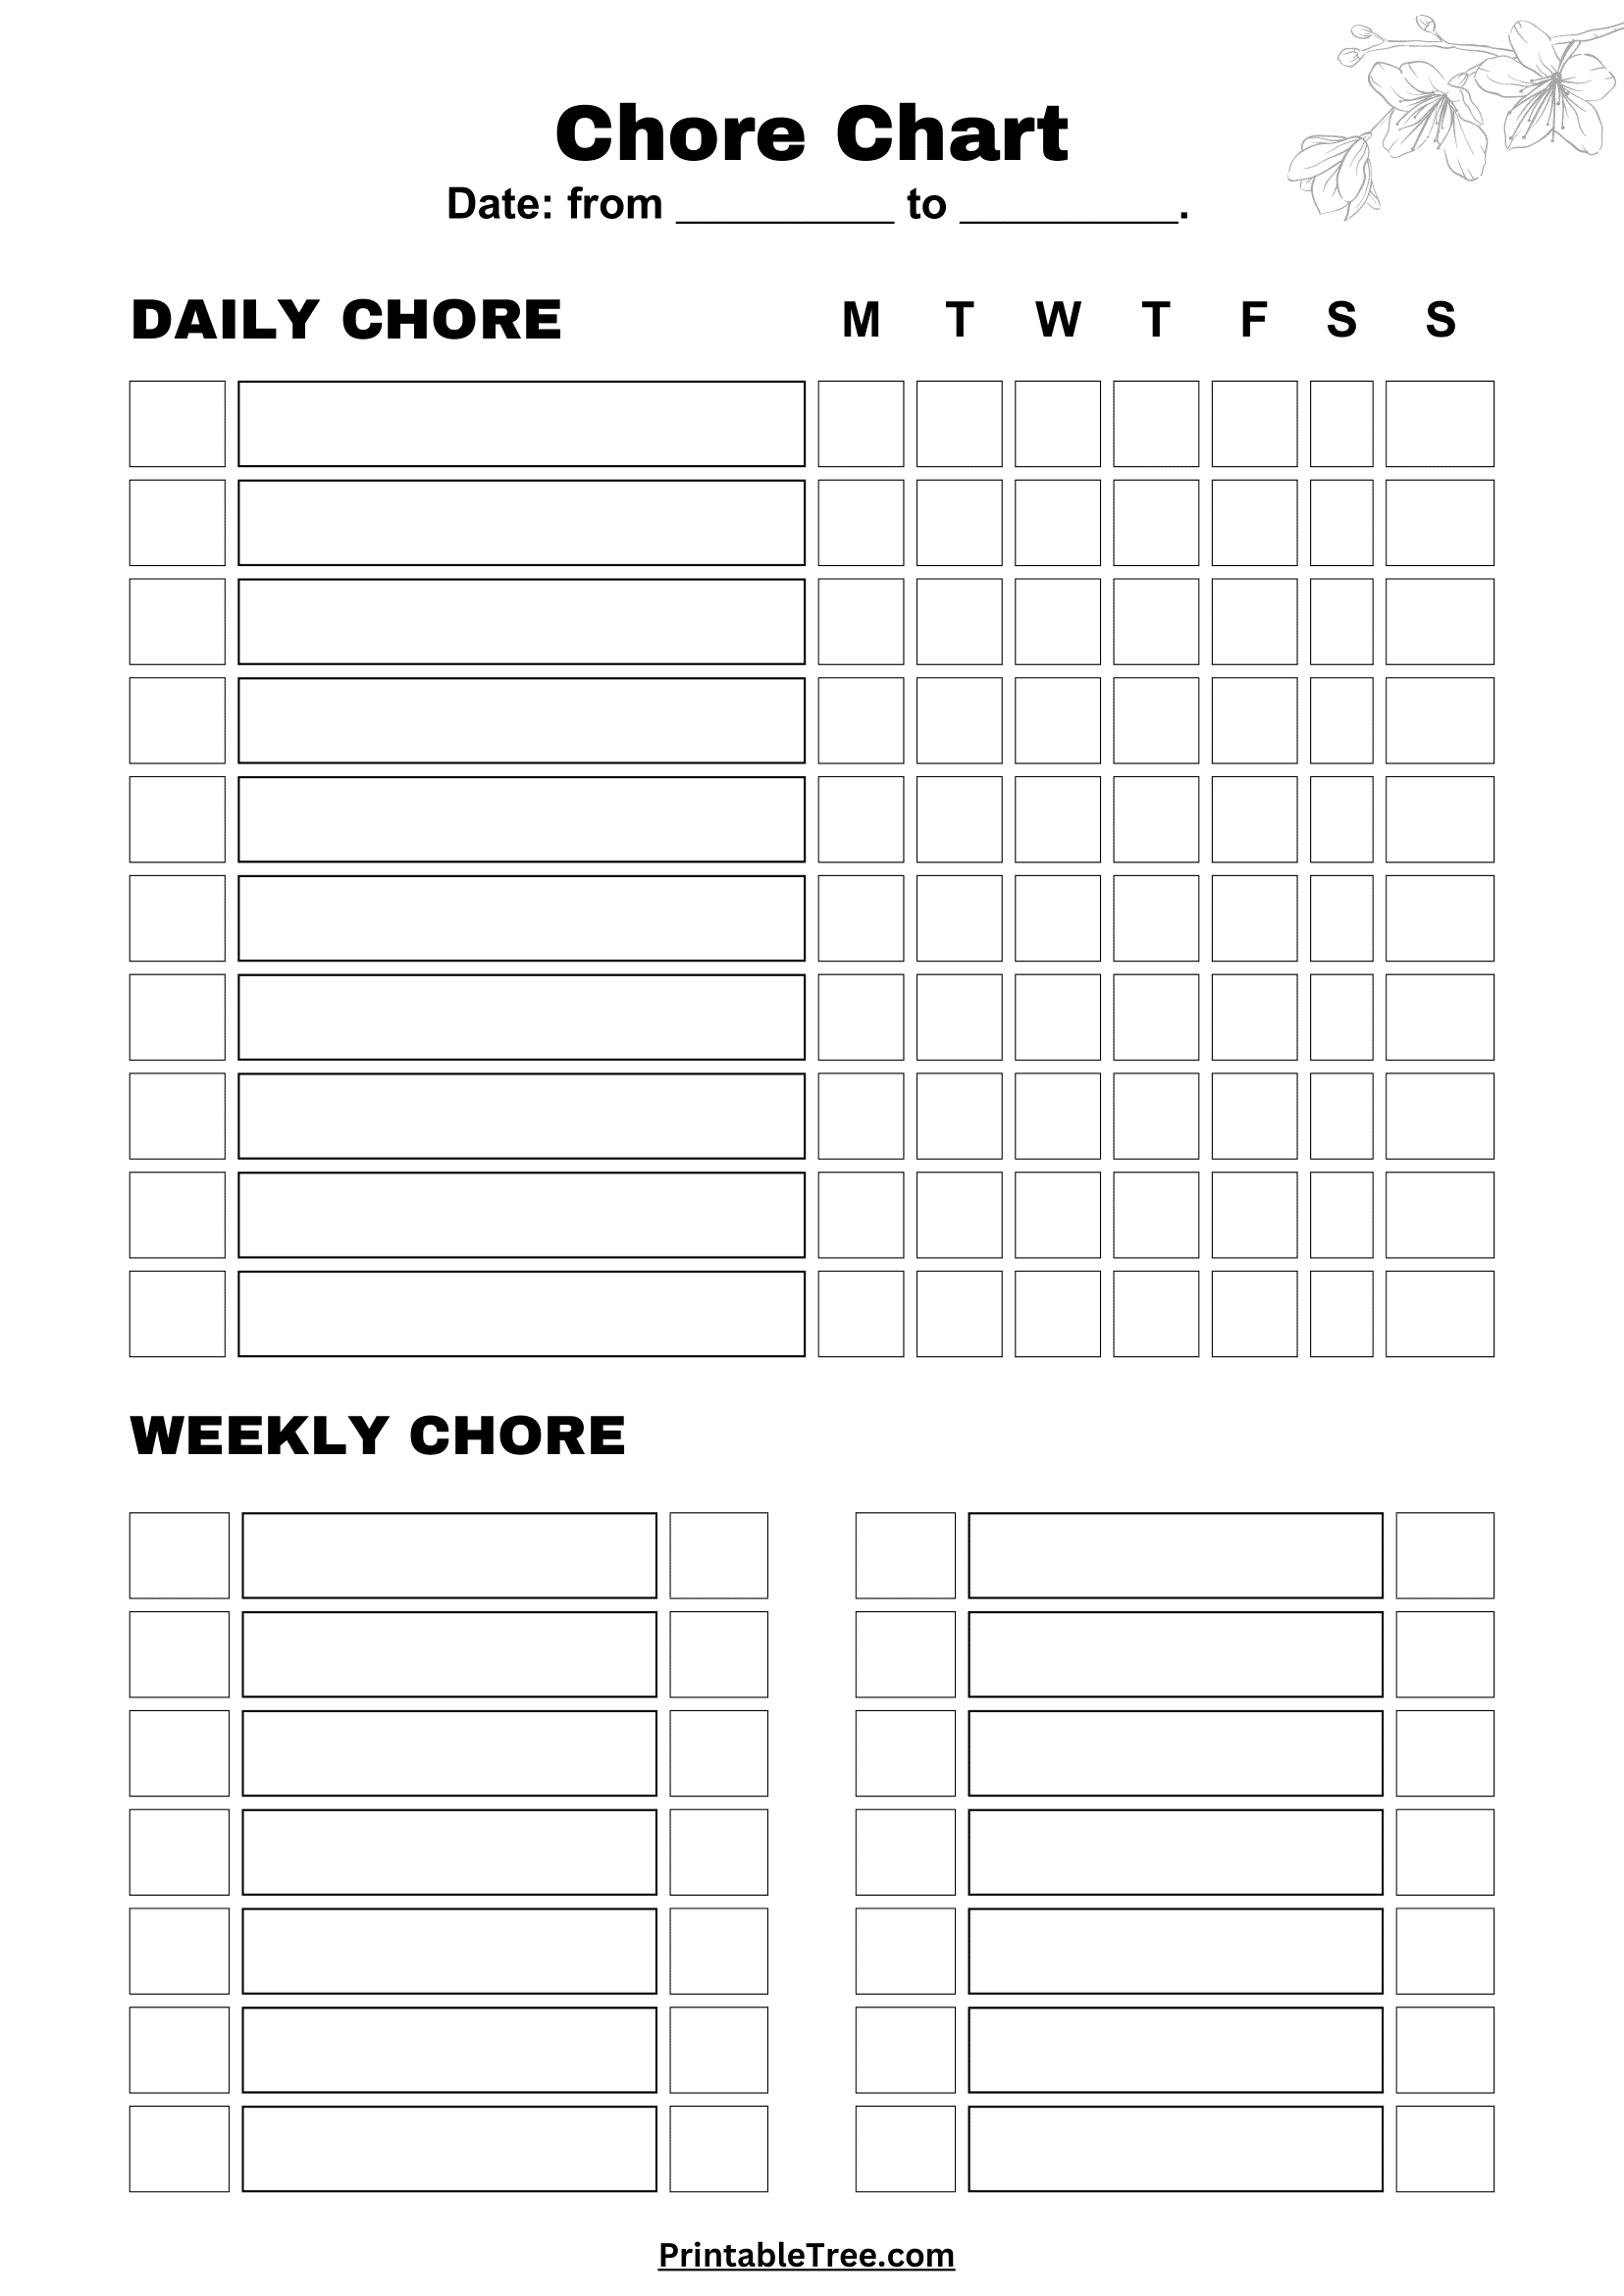 Free Printable Chore Chart PDF Template For Kids - Free Printable Chore Chart Templates